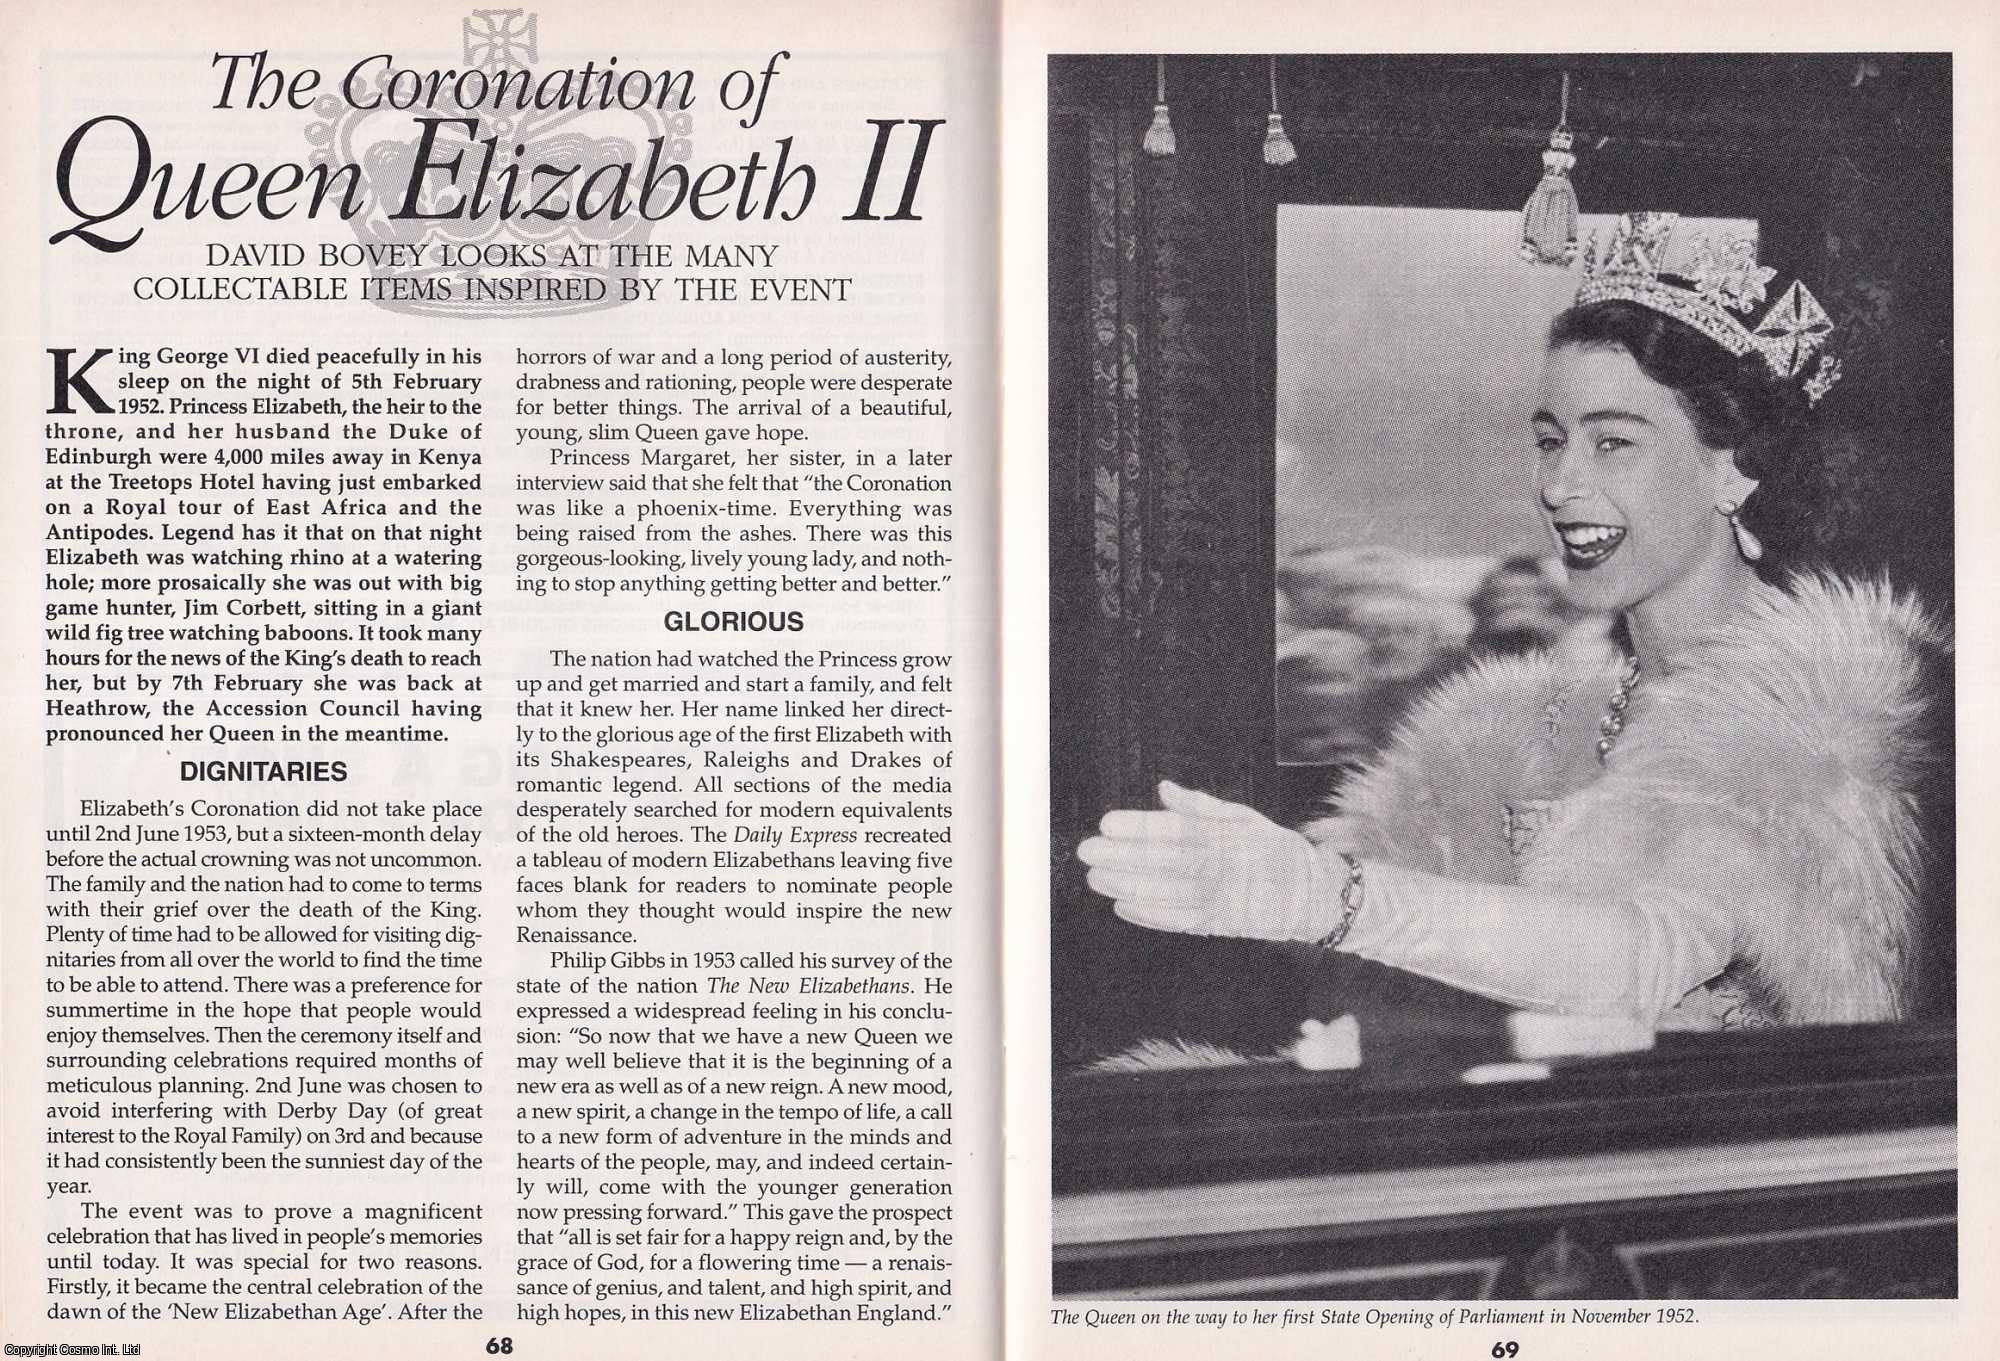 David Bovey - The Coronation of Queen Elizabeth II. Looking at The Many Collectable Items Inspired by The Event. This is an original article separated from an issue of The Book & Magazine Collector publication.